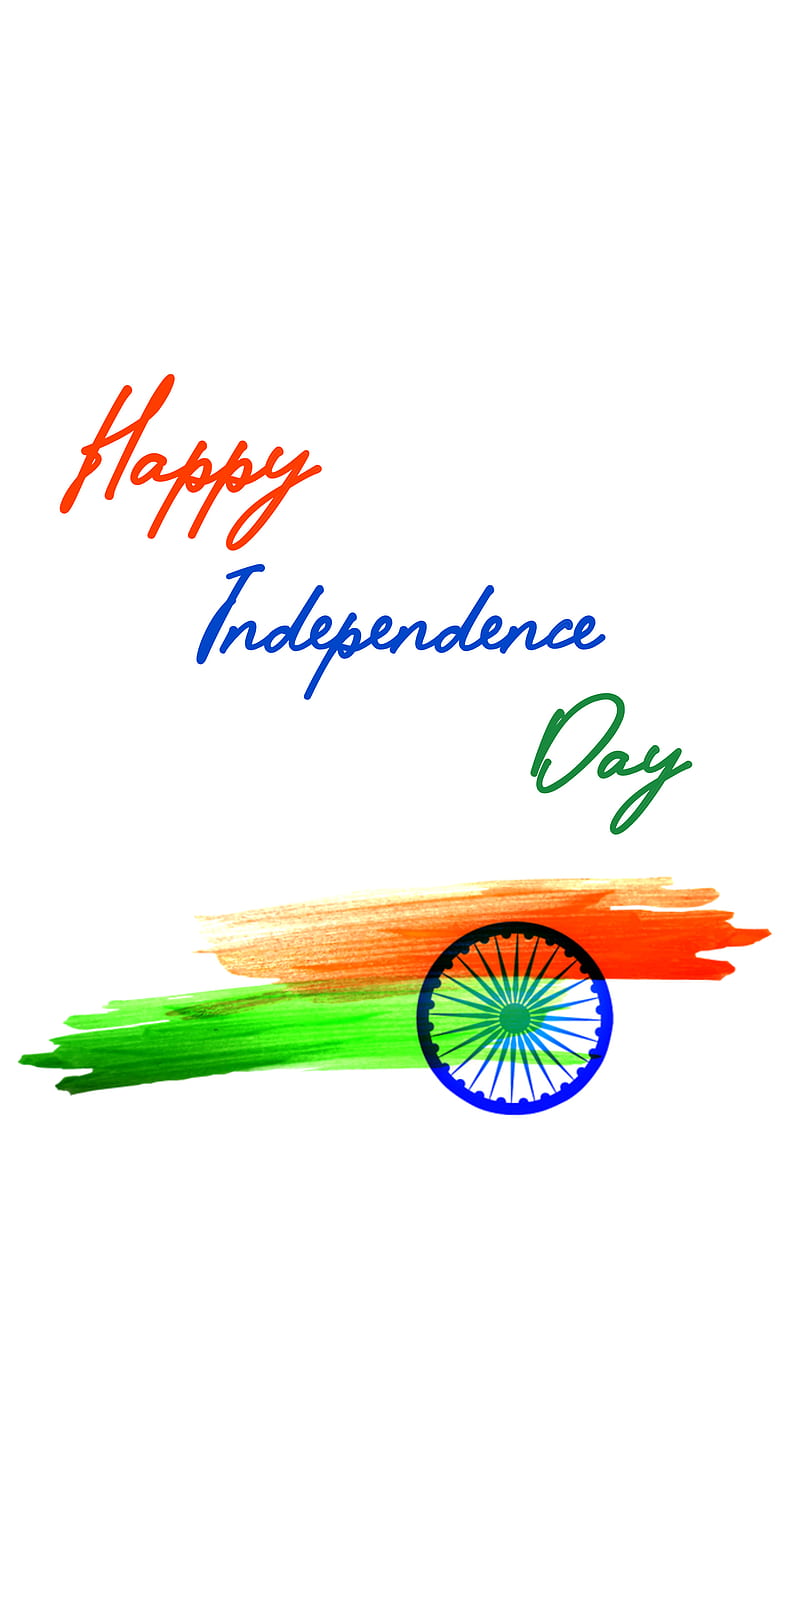 15 August Wallpaper and Images, Free Download Independence Day Wallpapers | Independence  day wishes, 15 august independence day, Independence day images